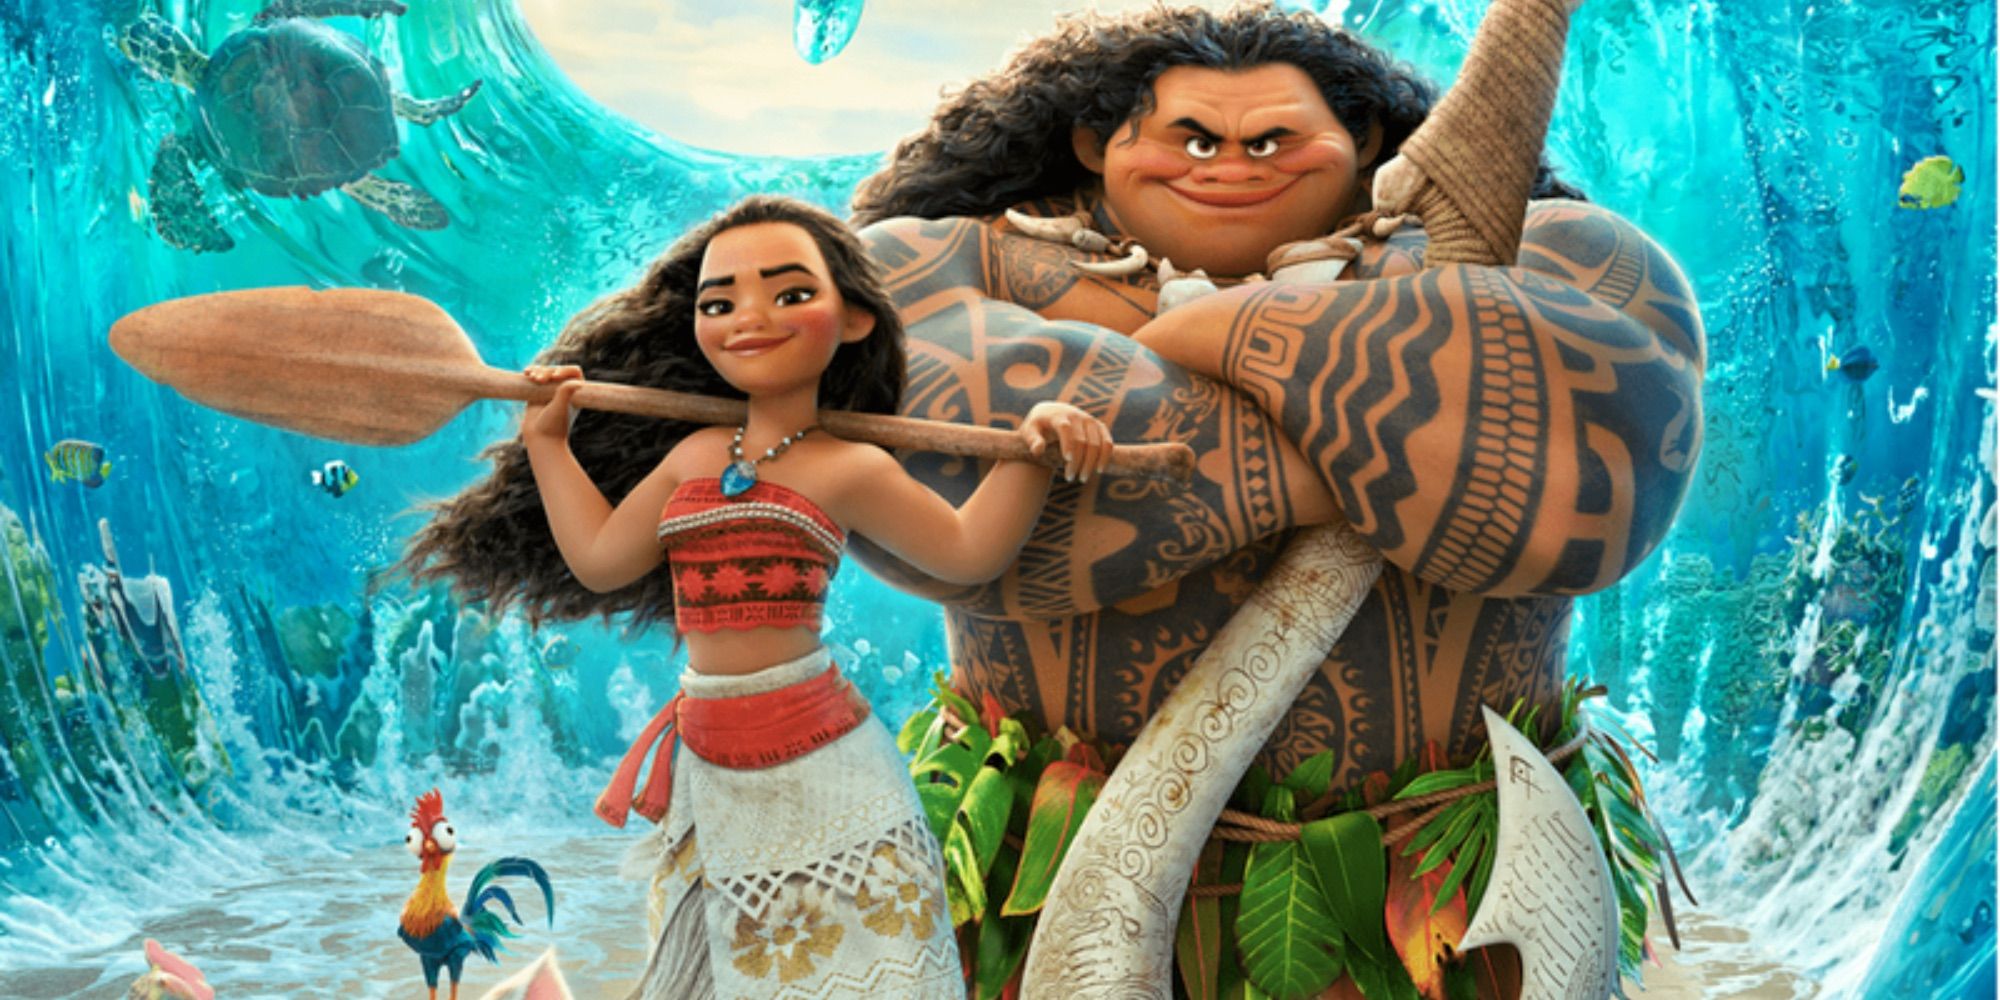 The ‘Hamilton’ director has been tapped for a live-action adaptation of ‘Moana’